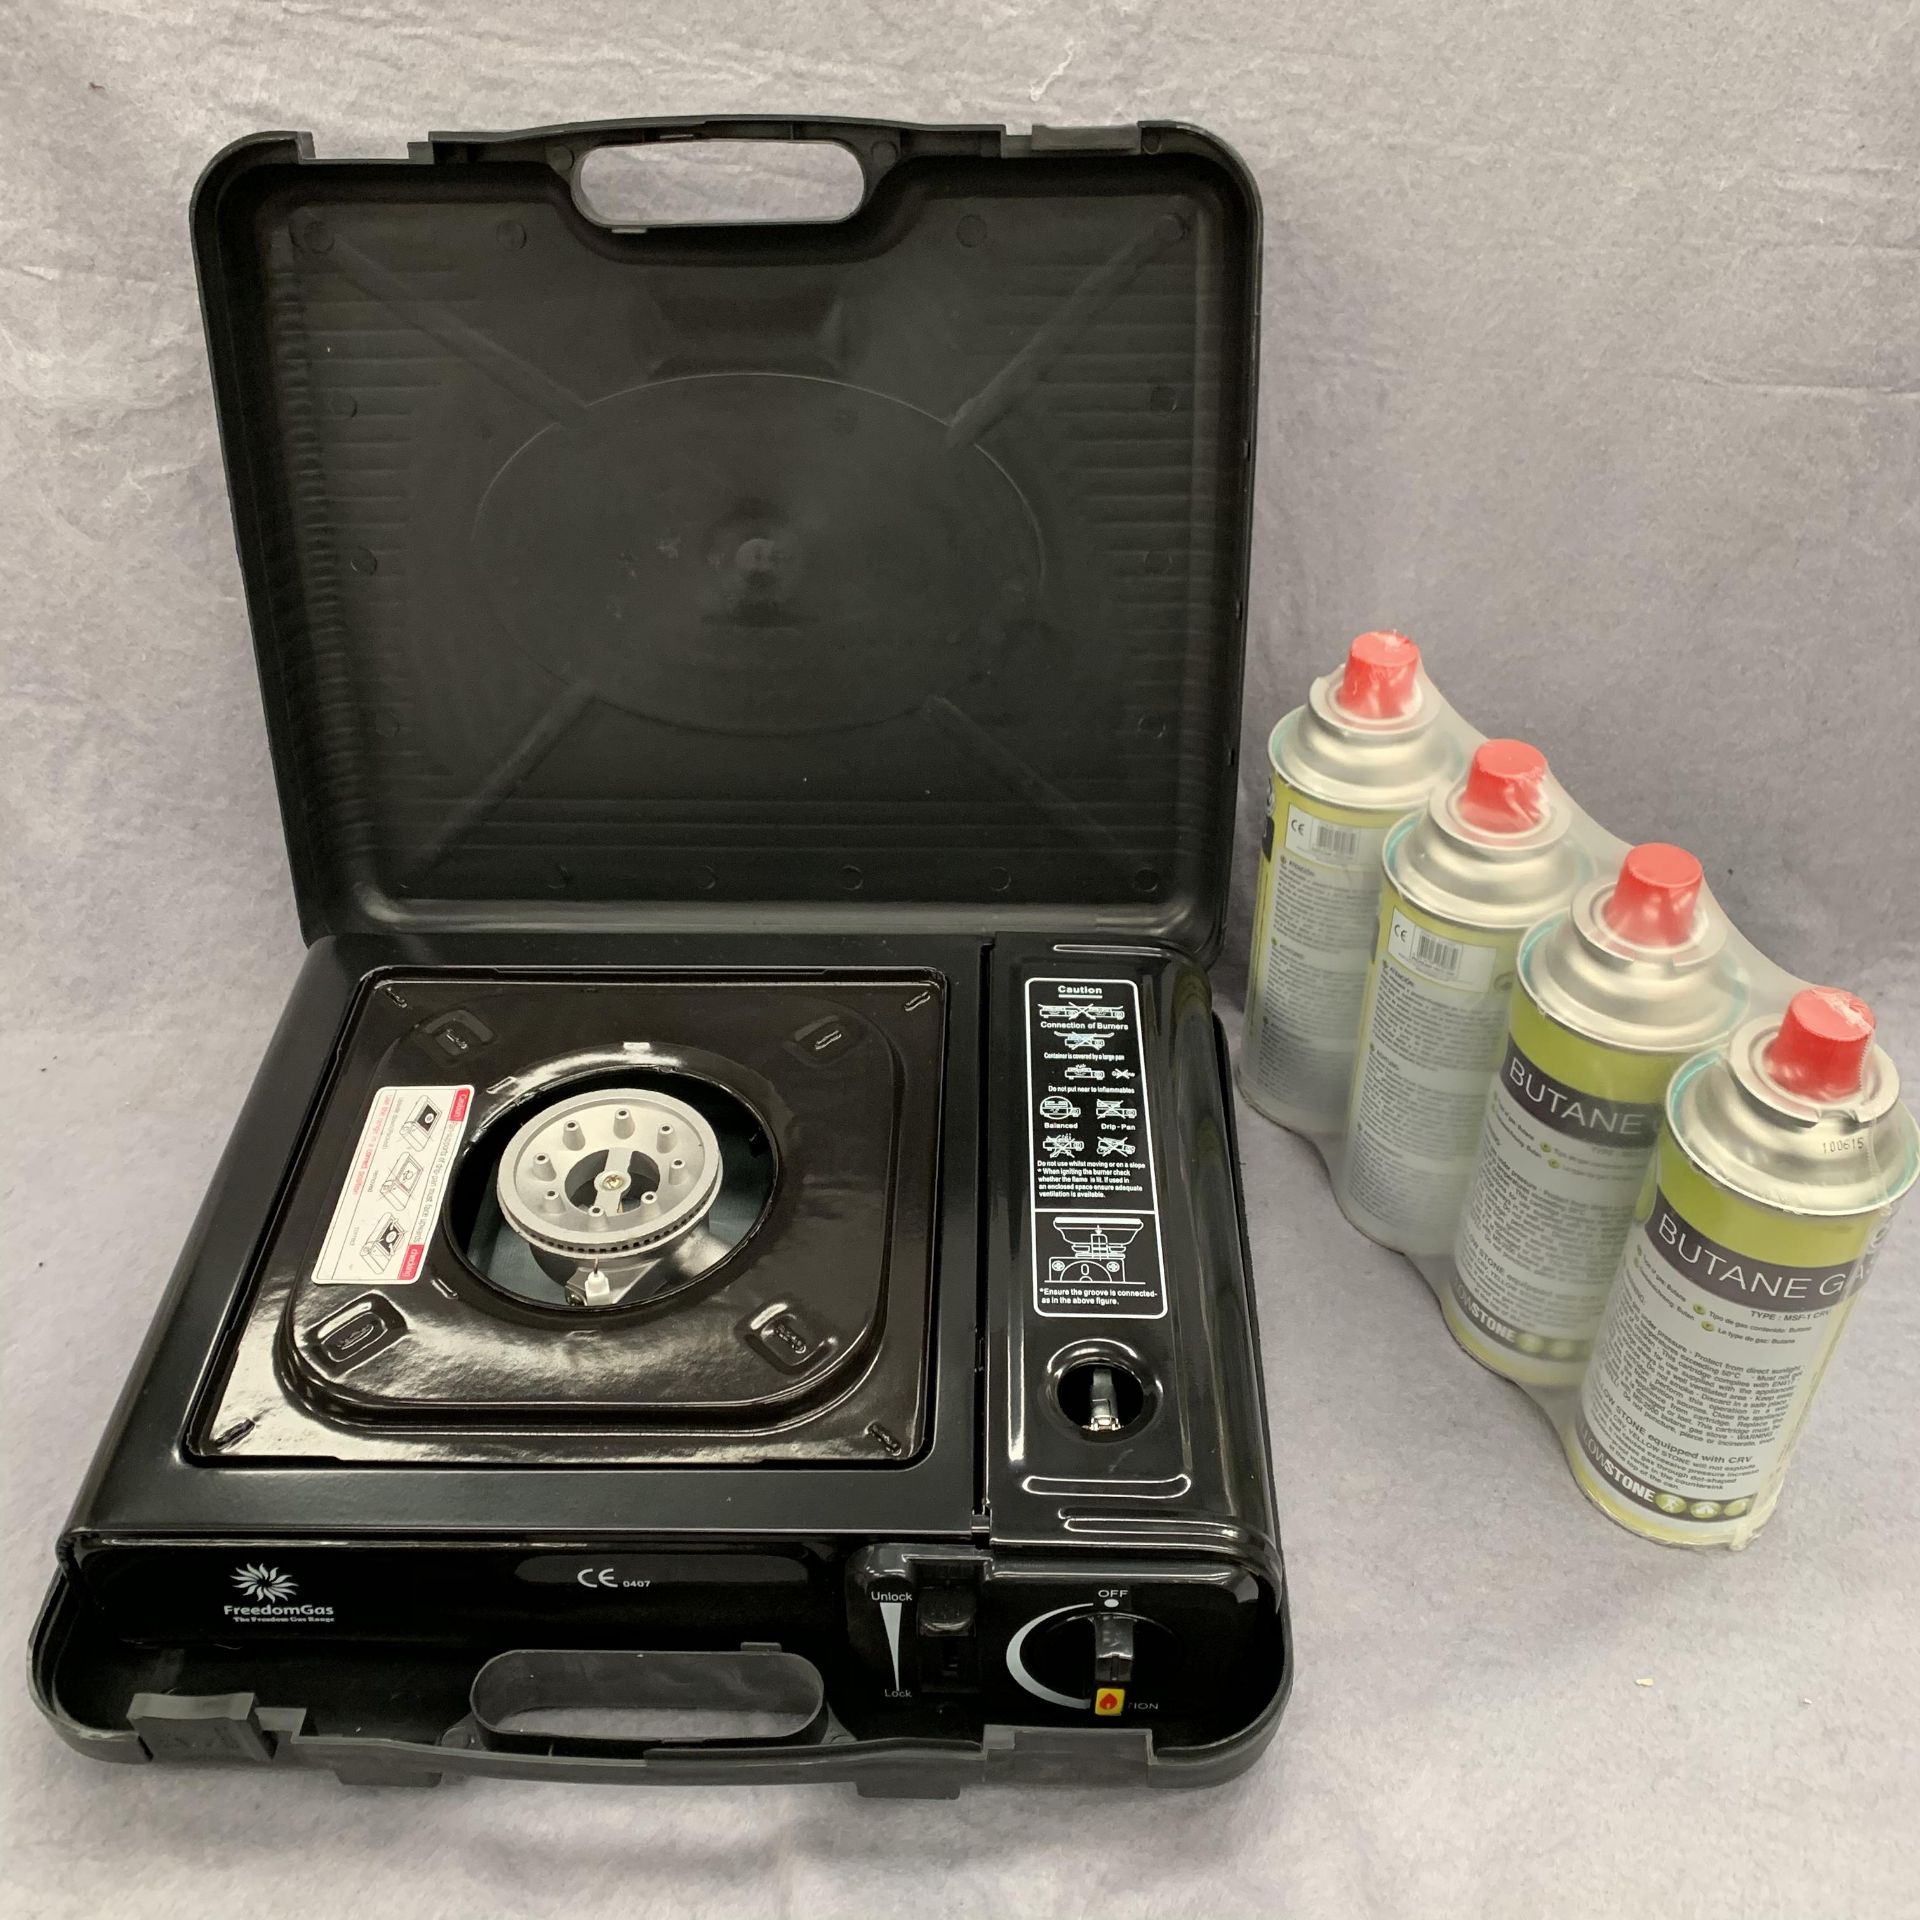 A Freedom Gas portable gas camping stove and four canisters of butane gas